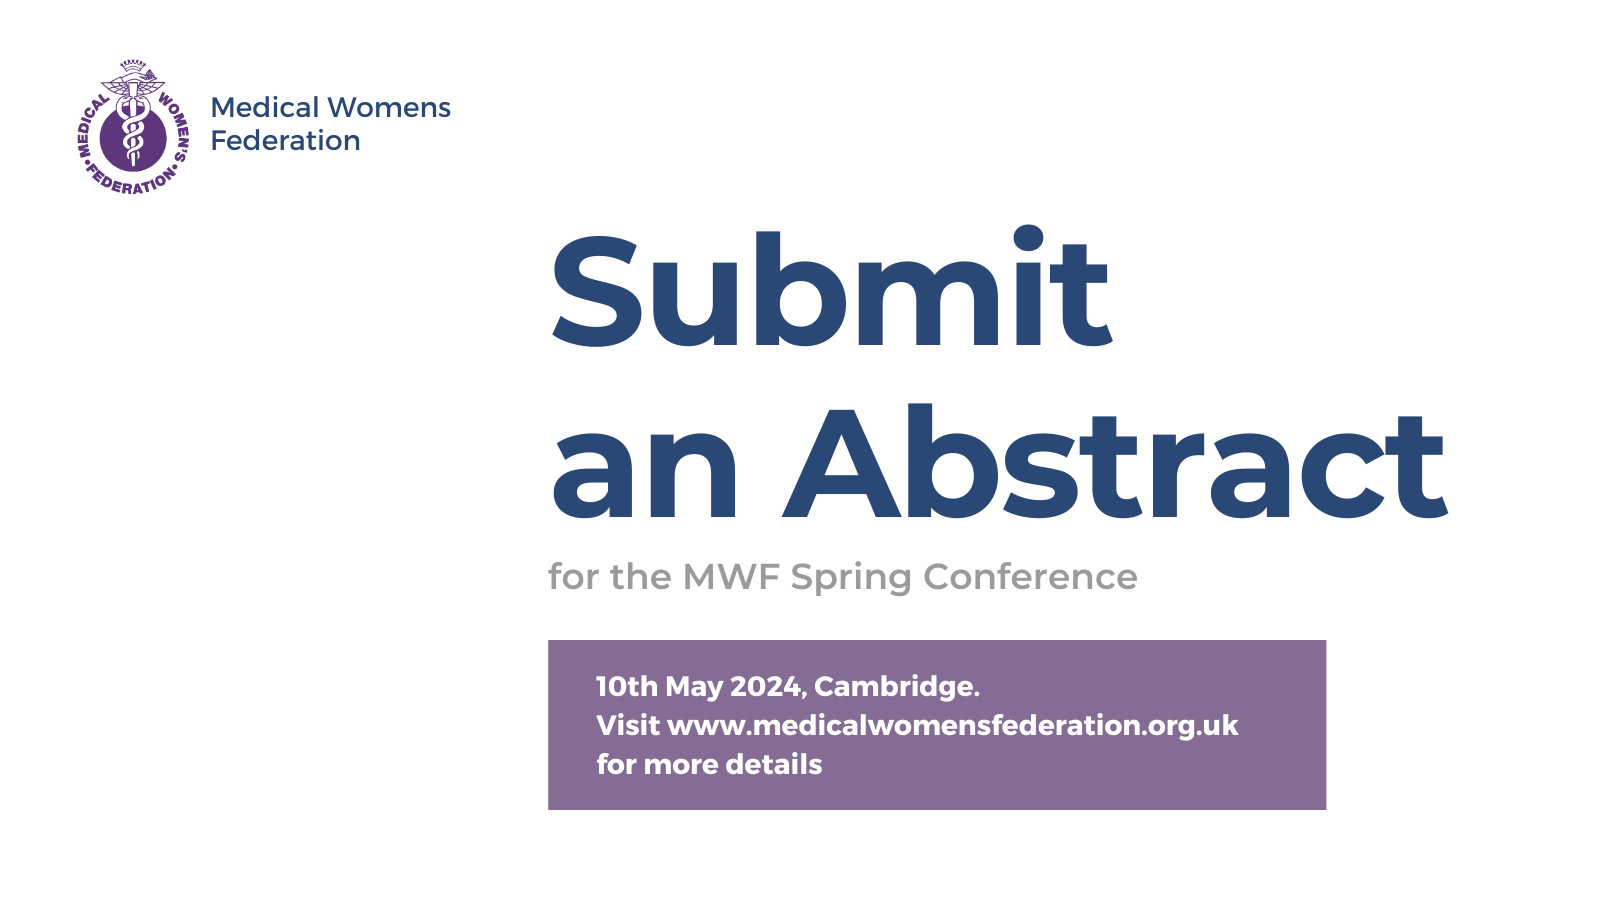 Submit an Abstract for the MWF Spring Conference 2024